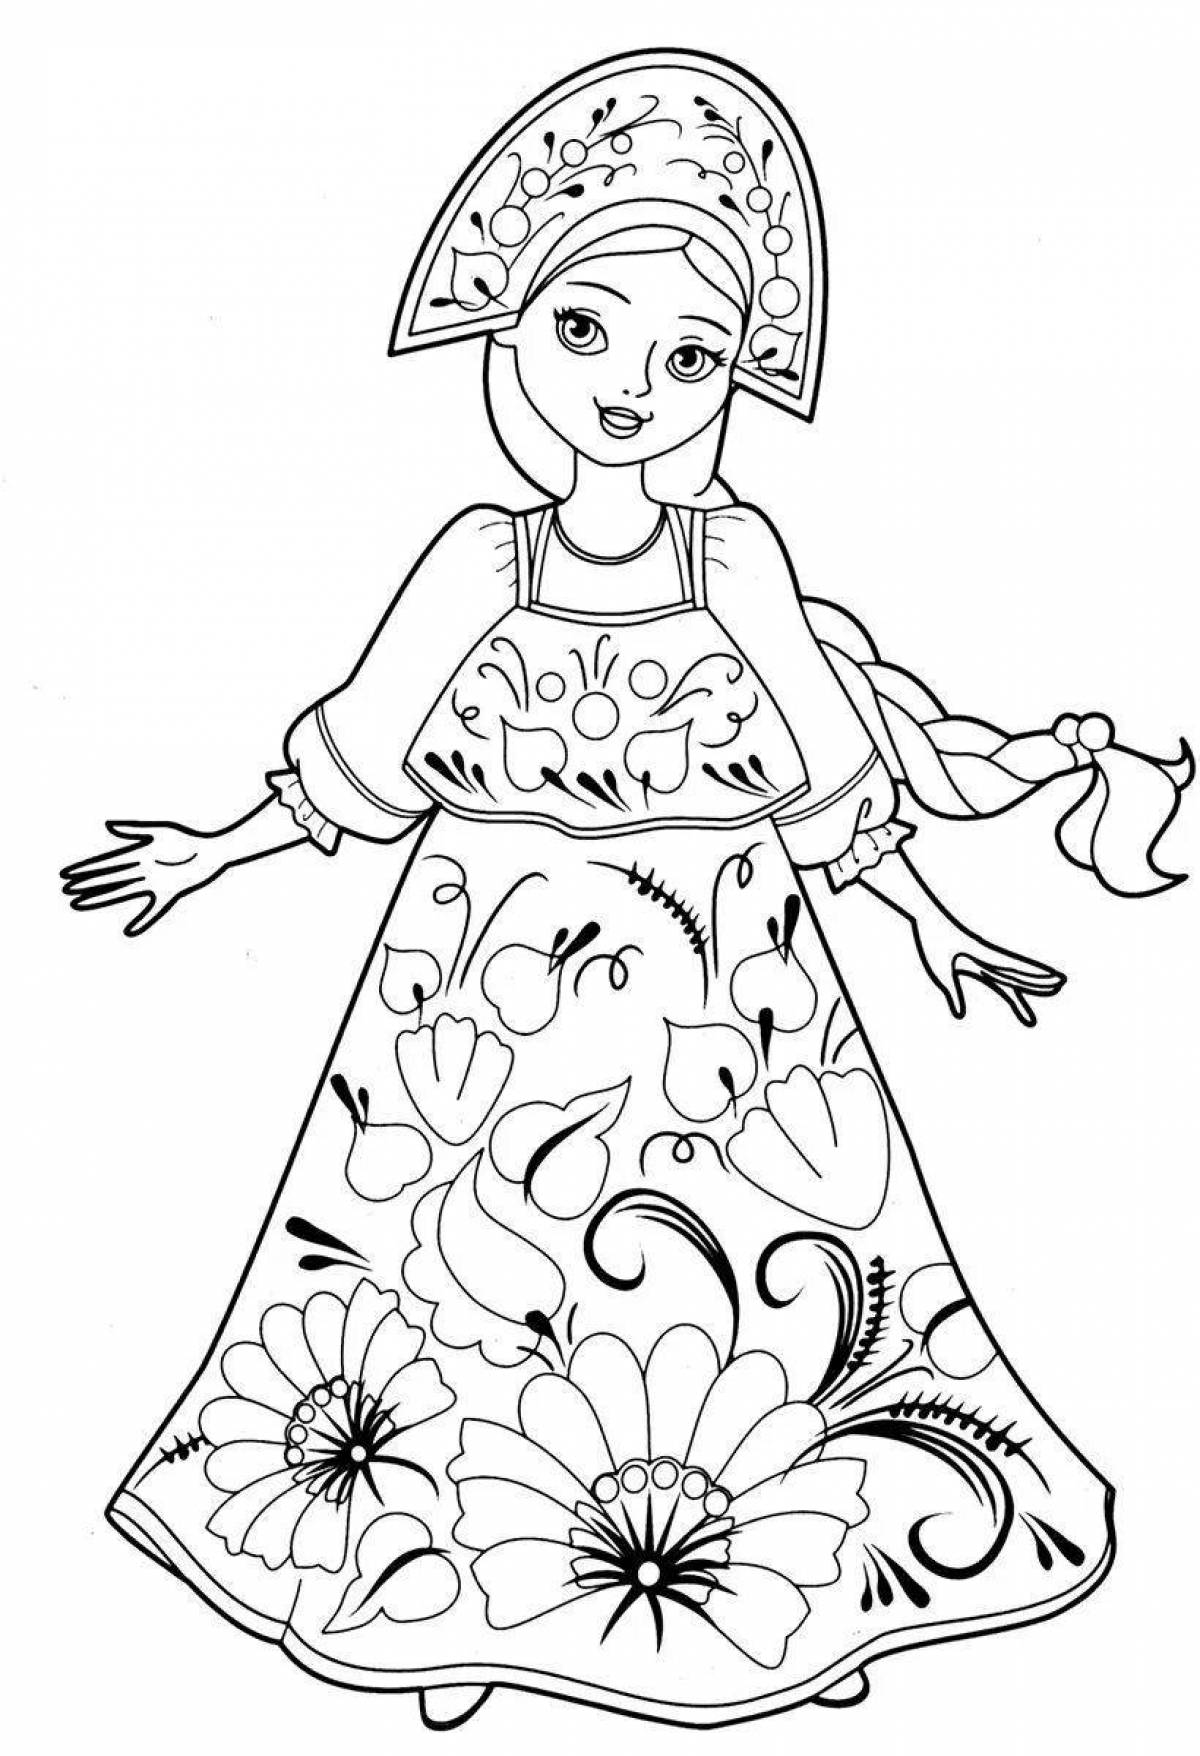 A fascinating coloring book for Russian fairy tales